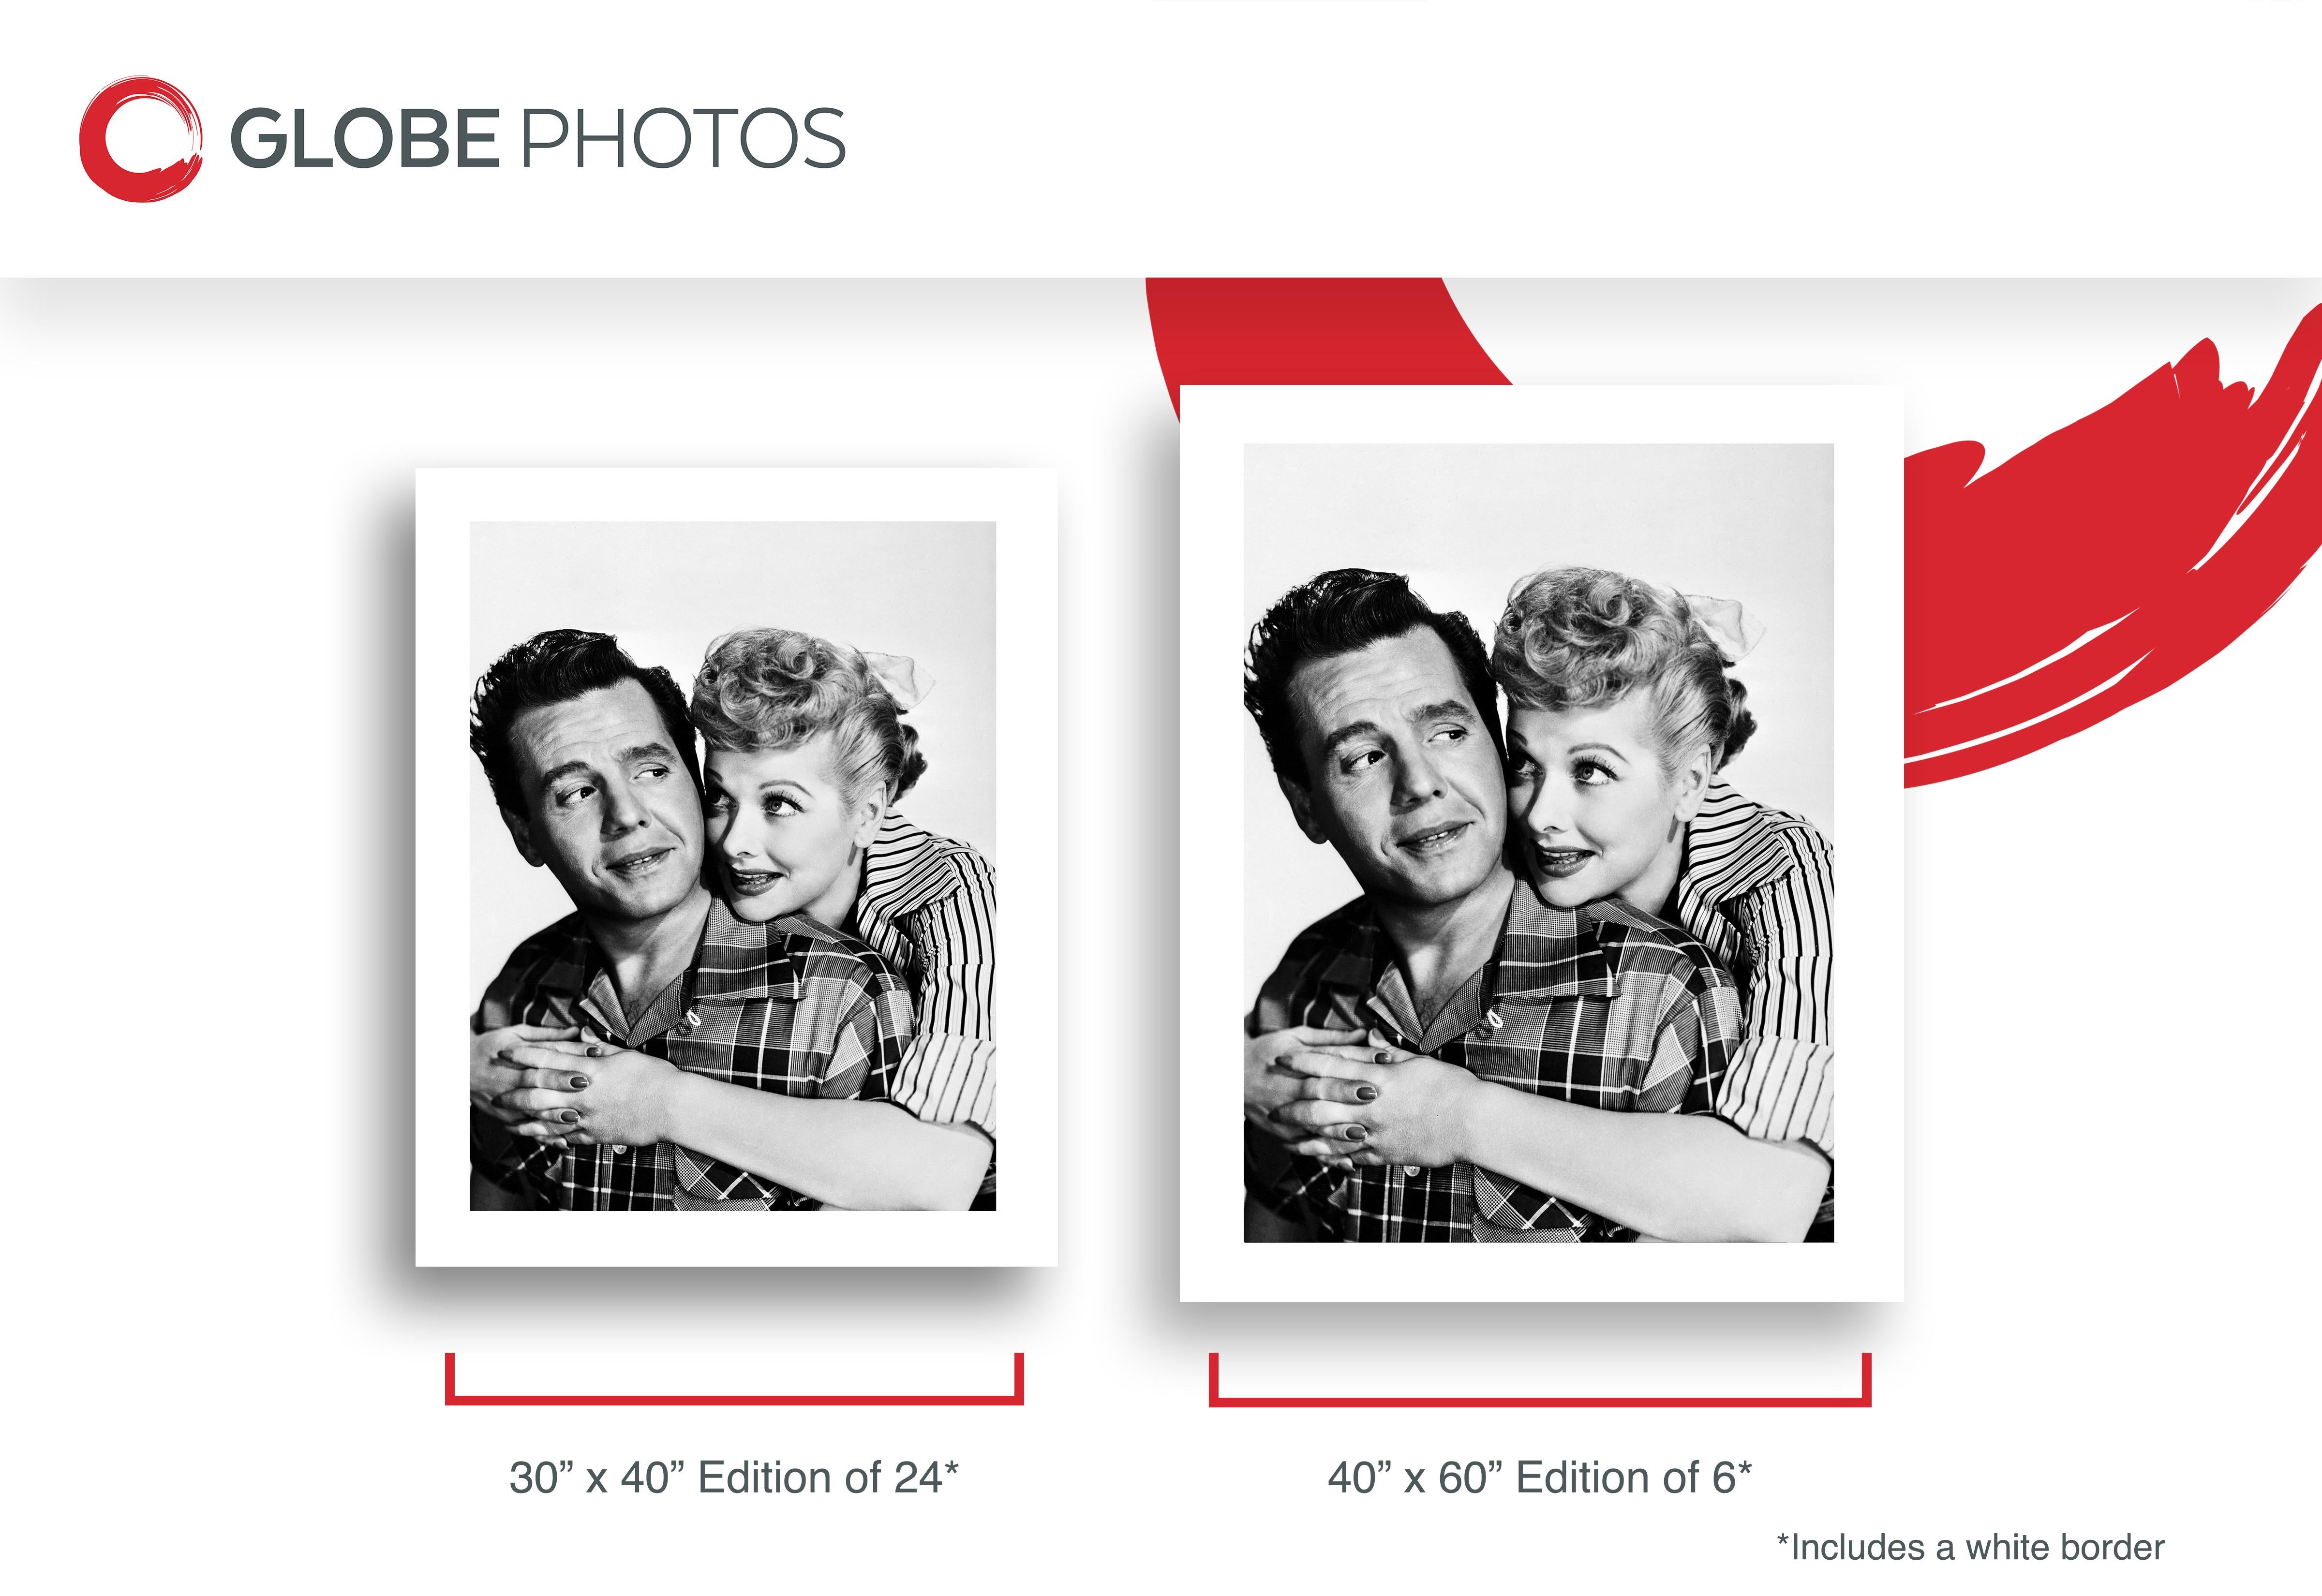 This unique capture features Lucille Ball hugging Desi Arnaz in a captivating studio portrait. 
 
Lucille Ball was an American actress, comedian, model, entertainment studio executive, and producer. She was the star of the self-produced sitcoms I